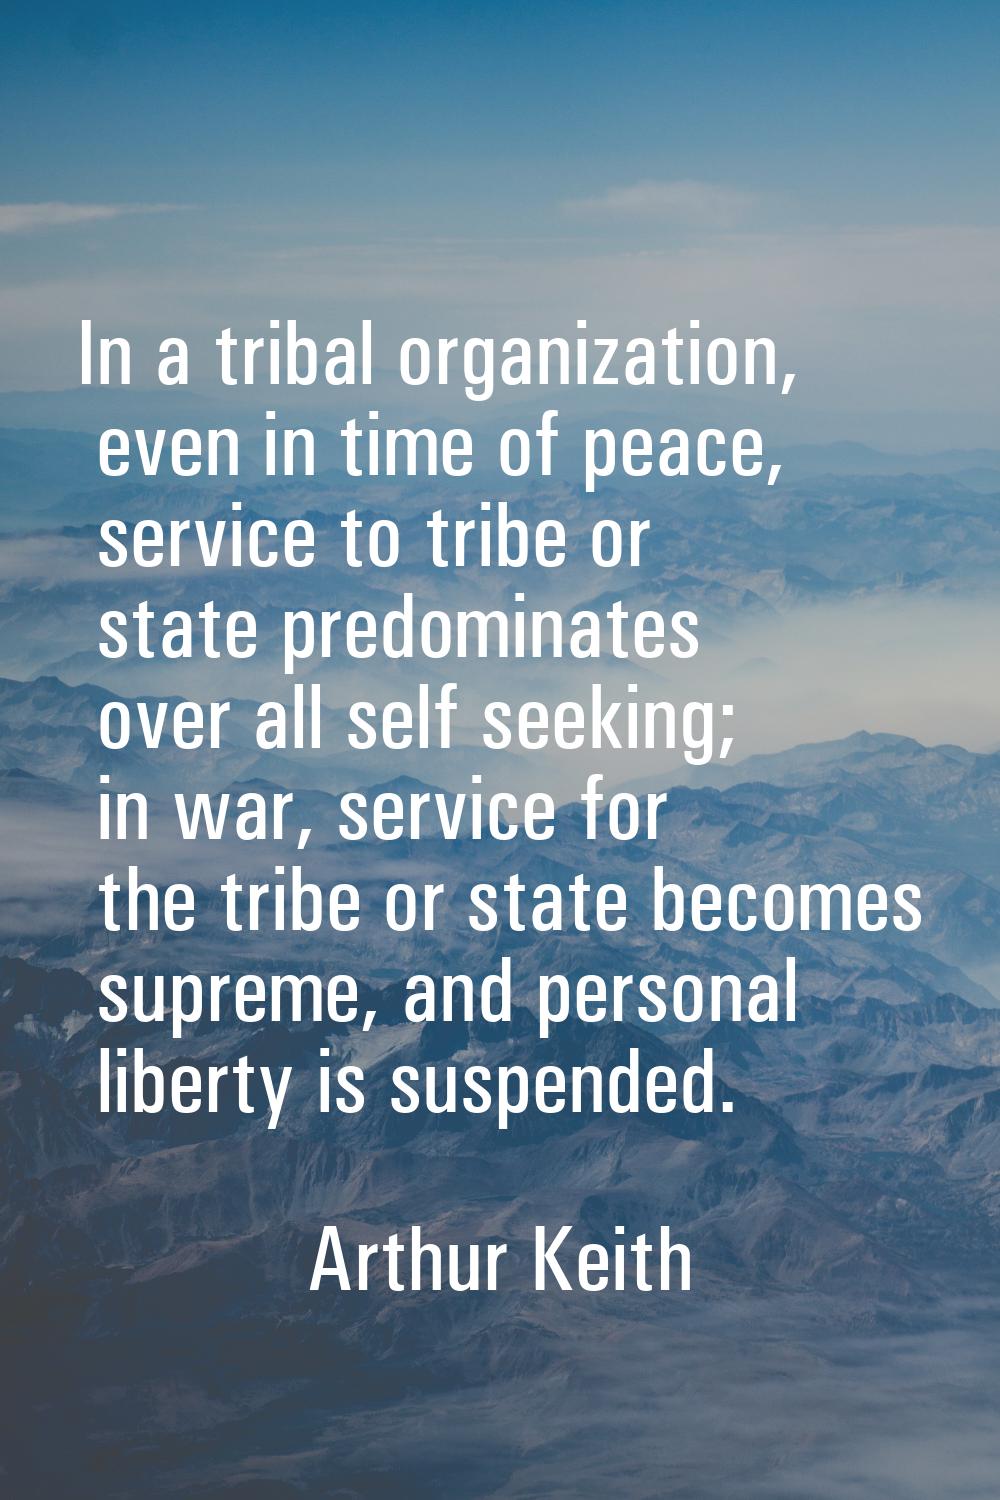 In a tribal organization, even in time of peace, service to tribe or state predominates over all se